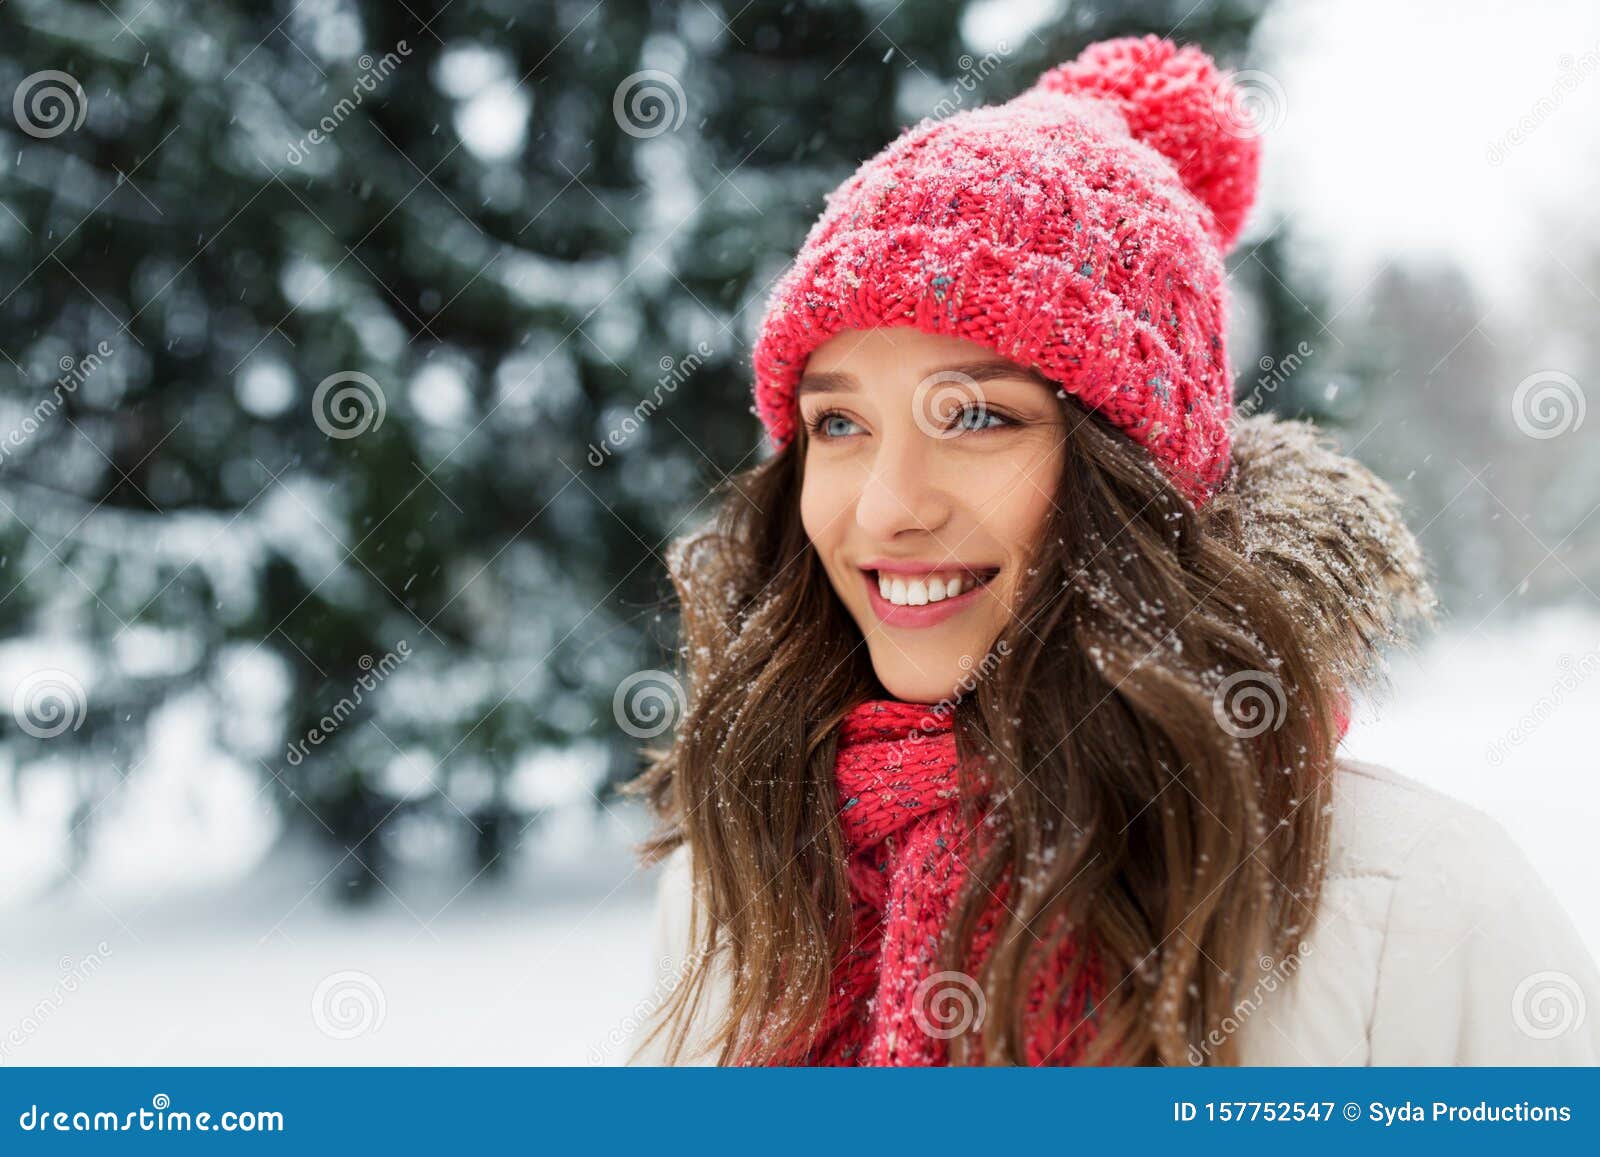 Smiling Teenage Girl Outdoors in Winter Stock Image - Image of concept ...